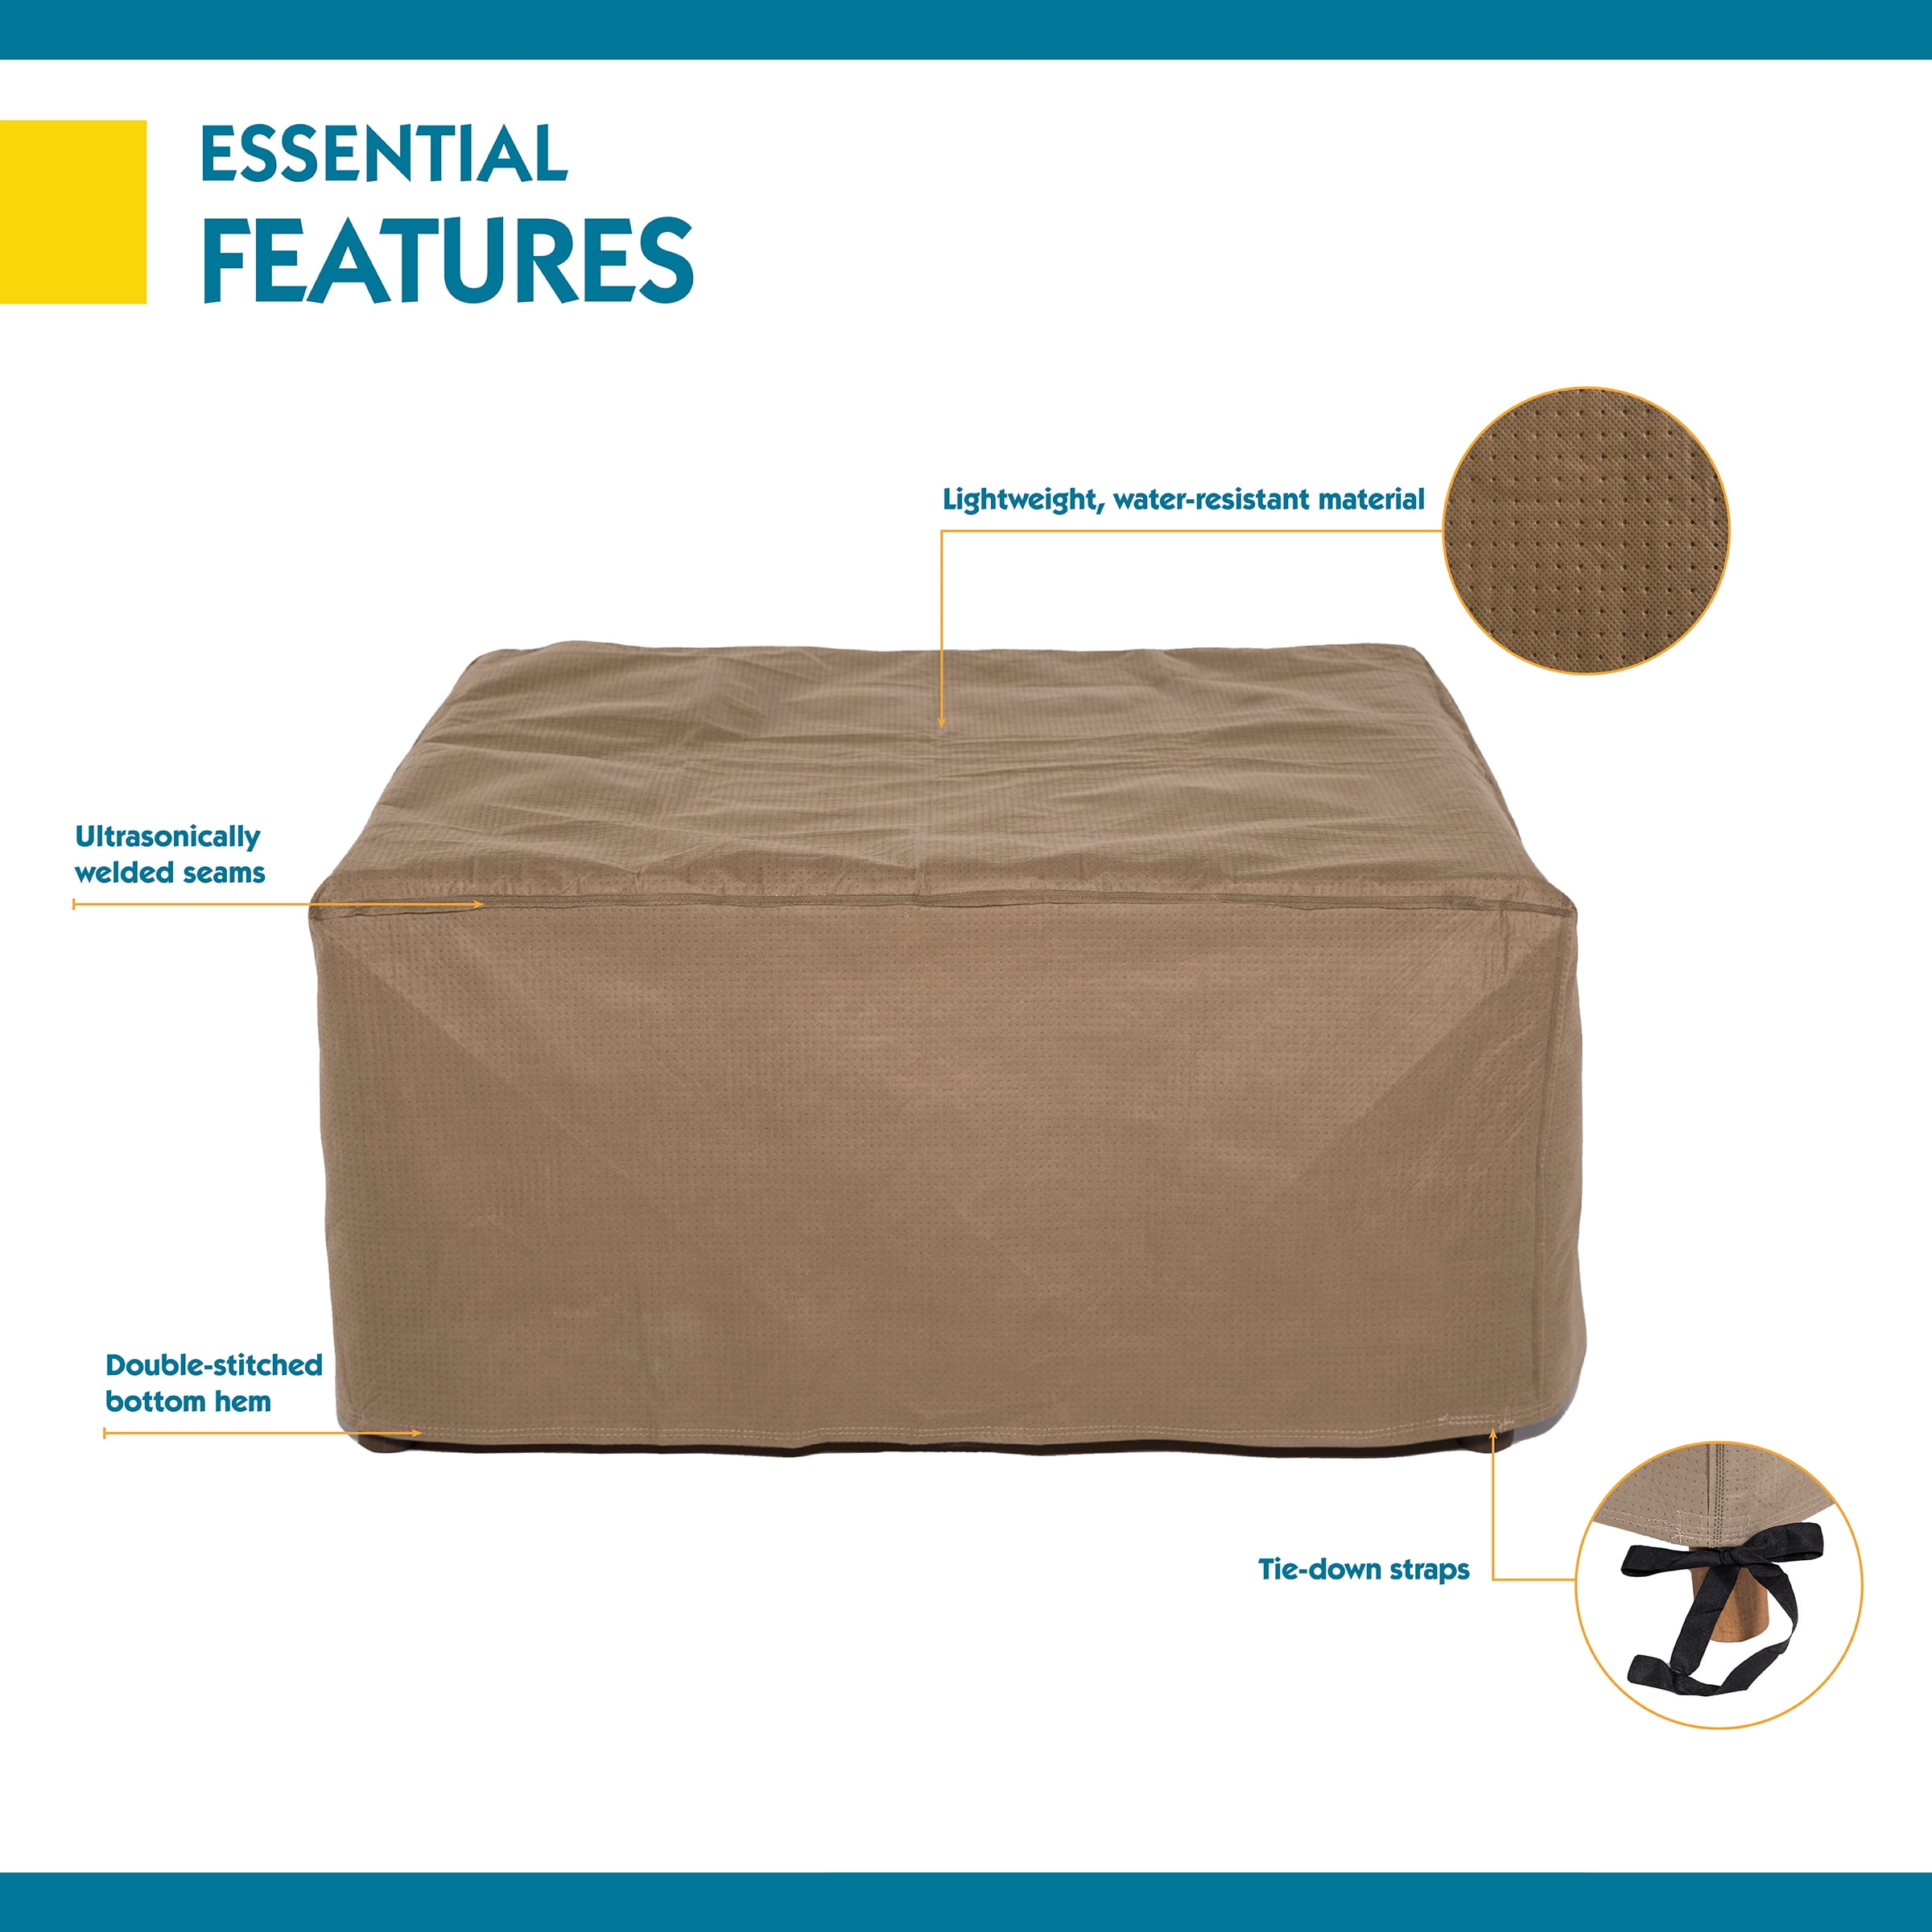 32 L x 25 W x 18 H Duck Covers Essential Rectangular Patio Ottoman or Side Table Cover 